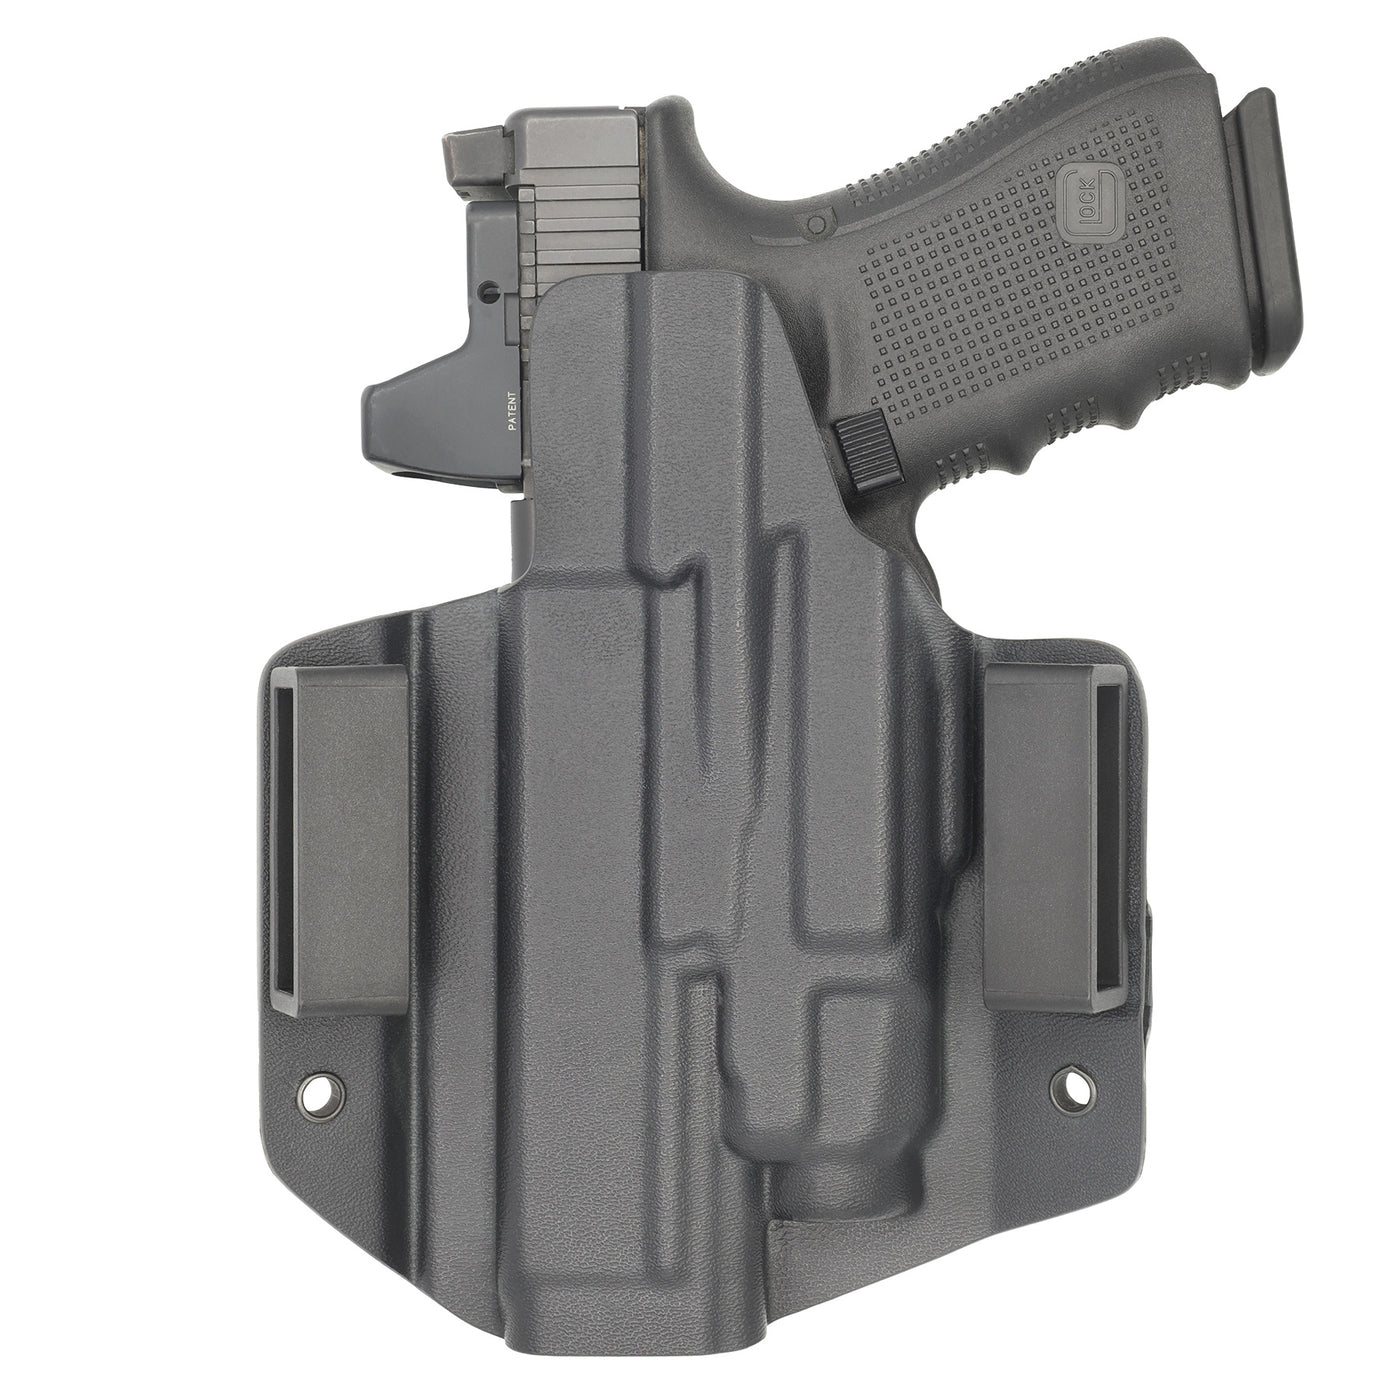 C&G Holsters quickship OWB tactical OZ9/c streamlight tlr7/a in holstered position back view